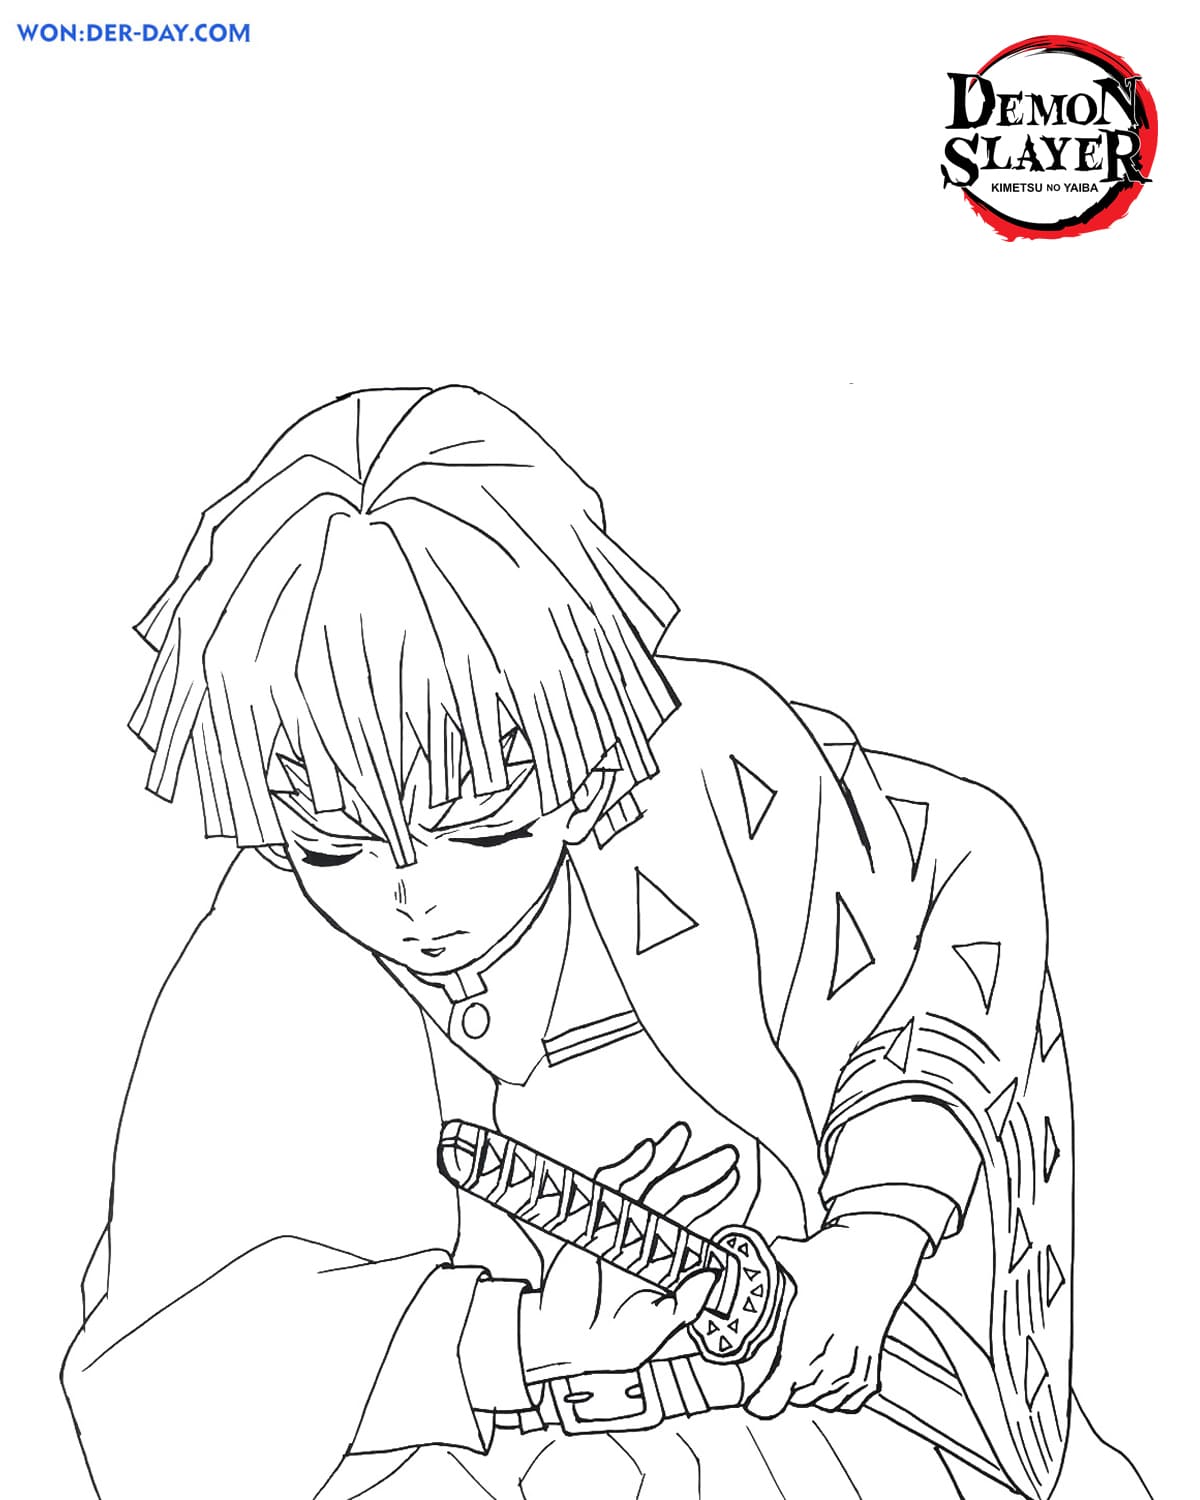 Anime Coloring Pages Demon Slayer Demon Slayer coloring pages